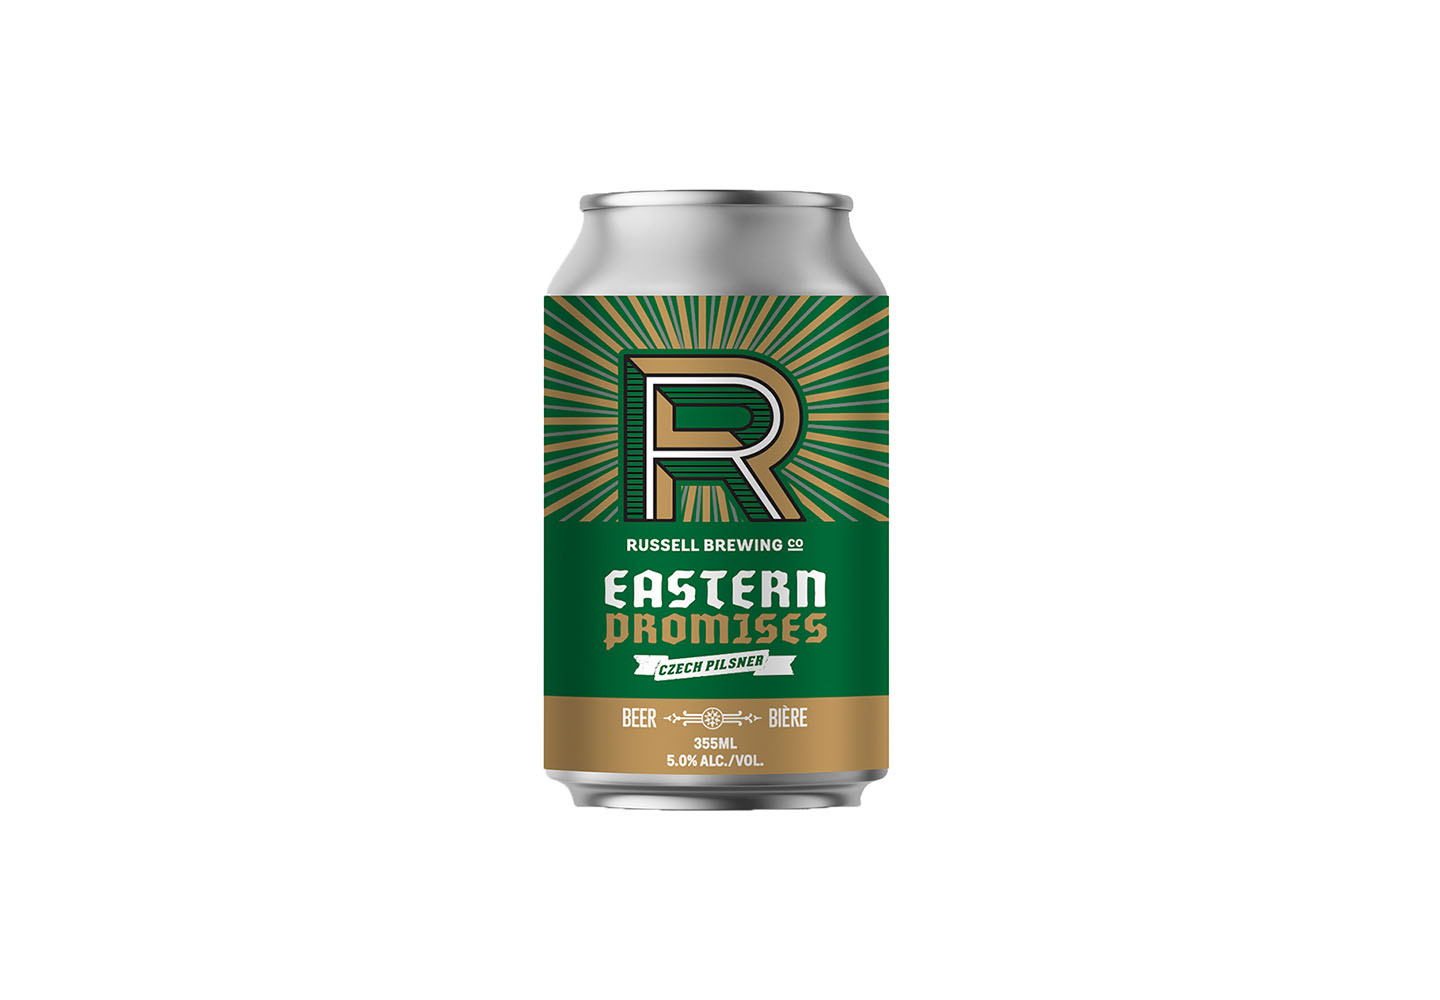 Eastern promises – 355mL – Russell Brewing